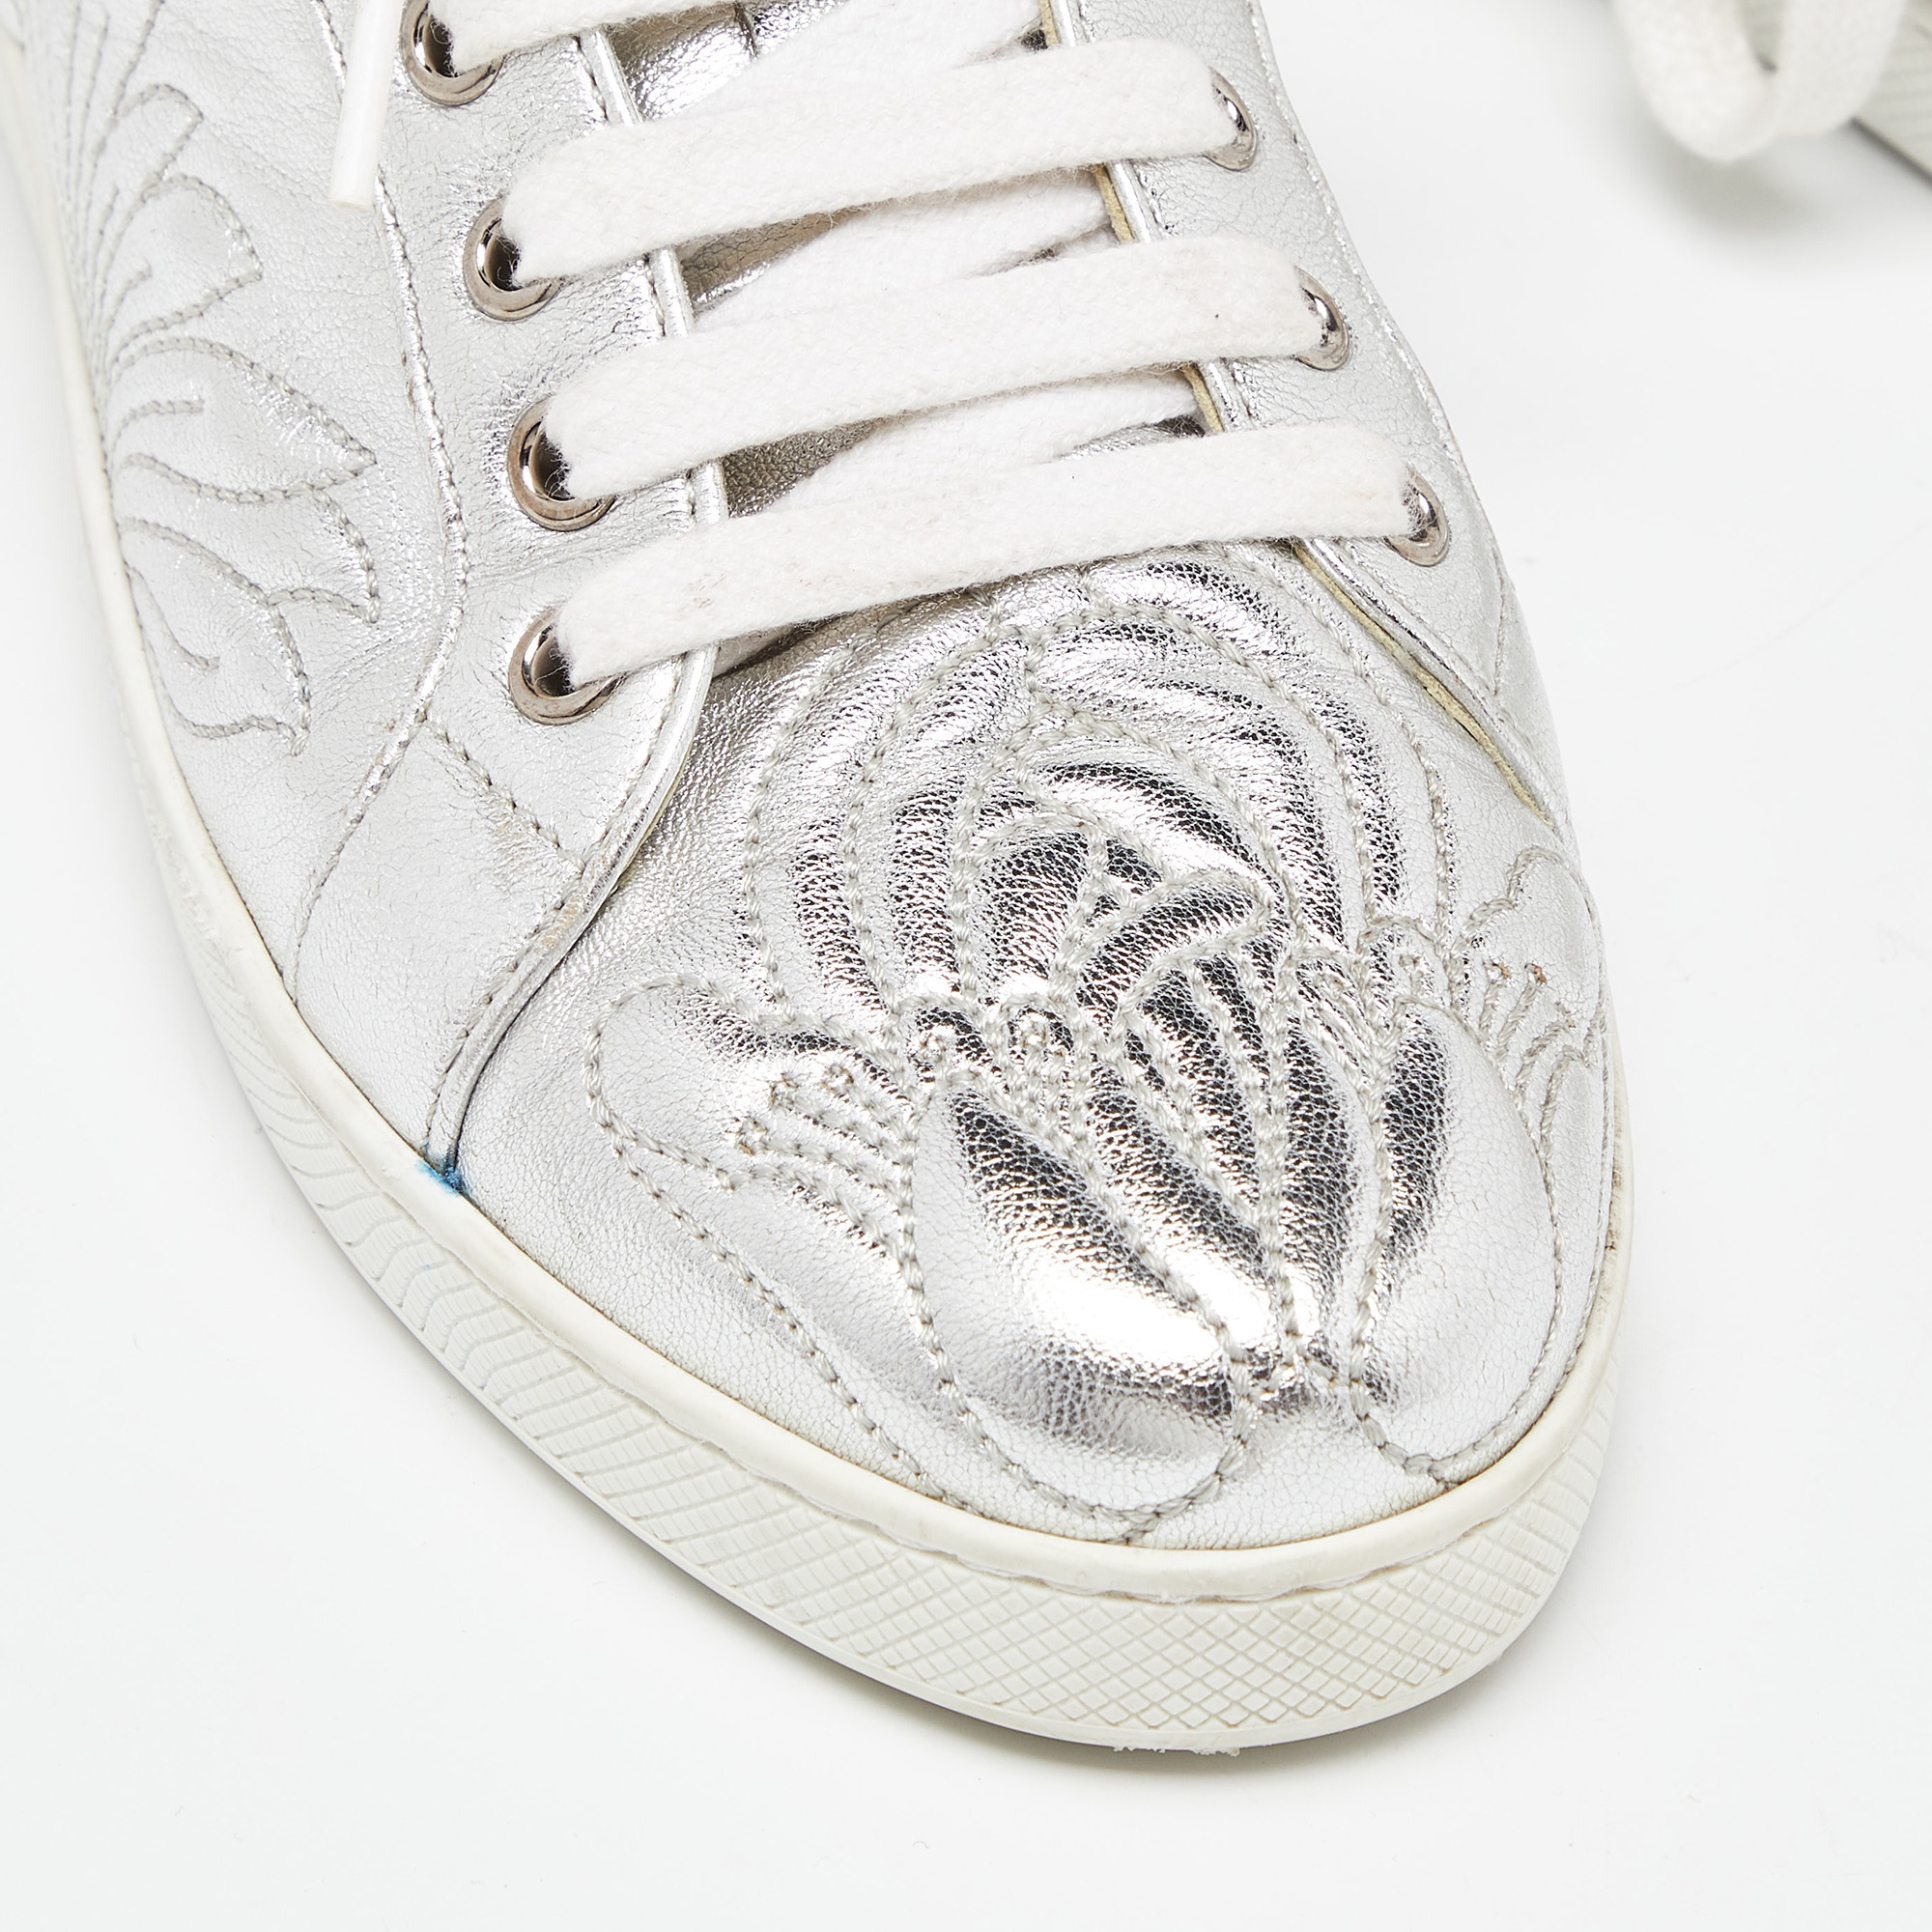 Prada Silver Embroidered Leather Low Top Sneakers Size 38